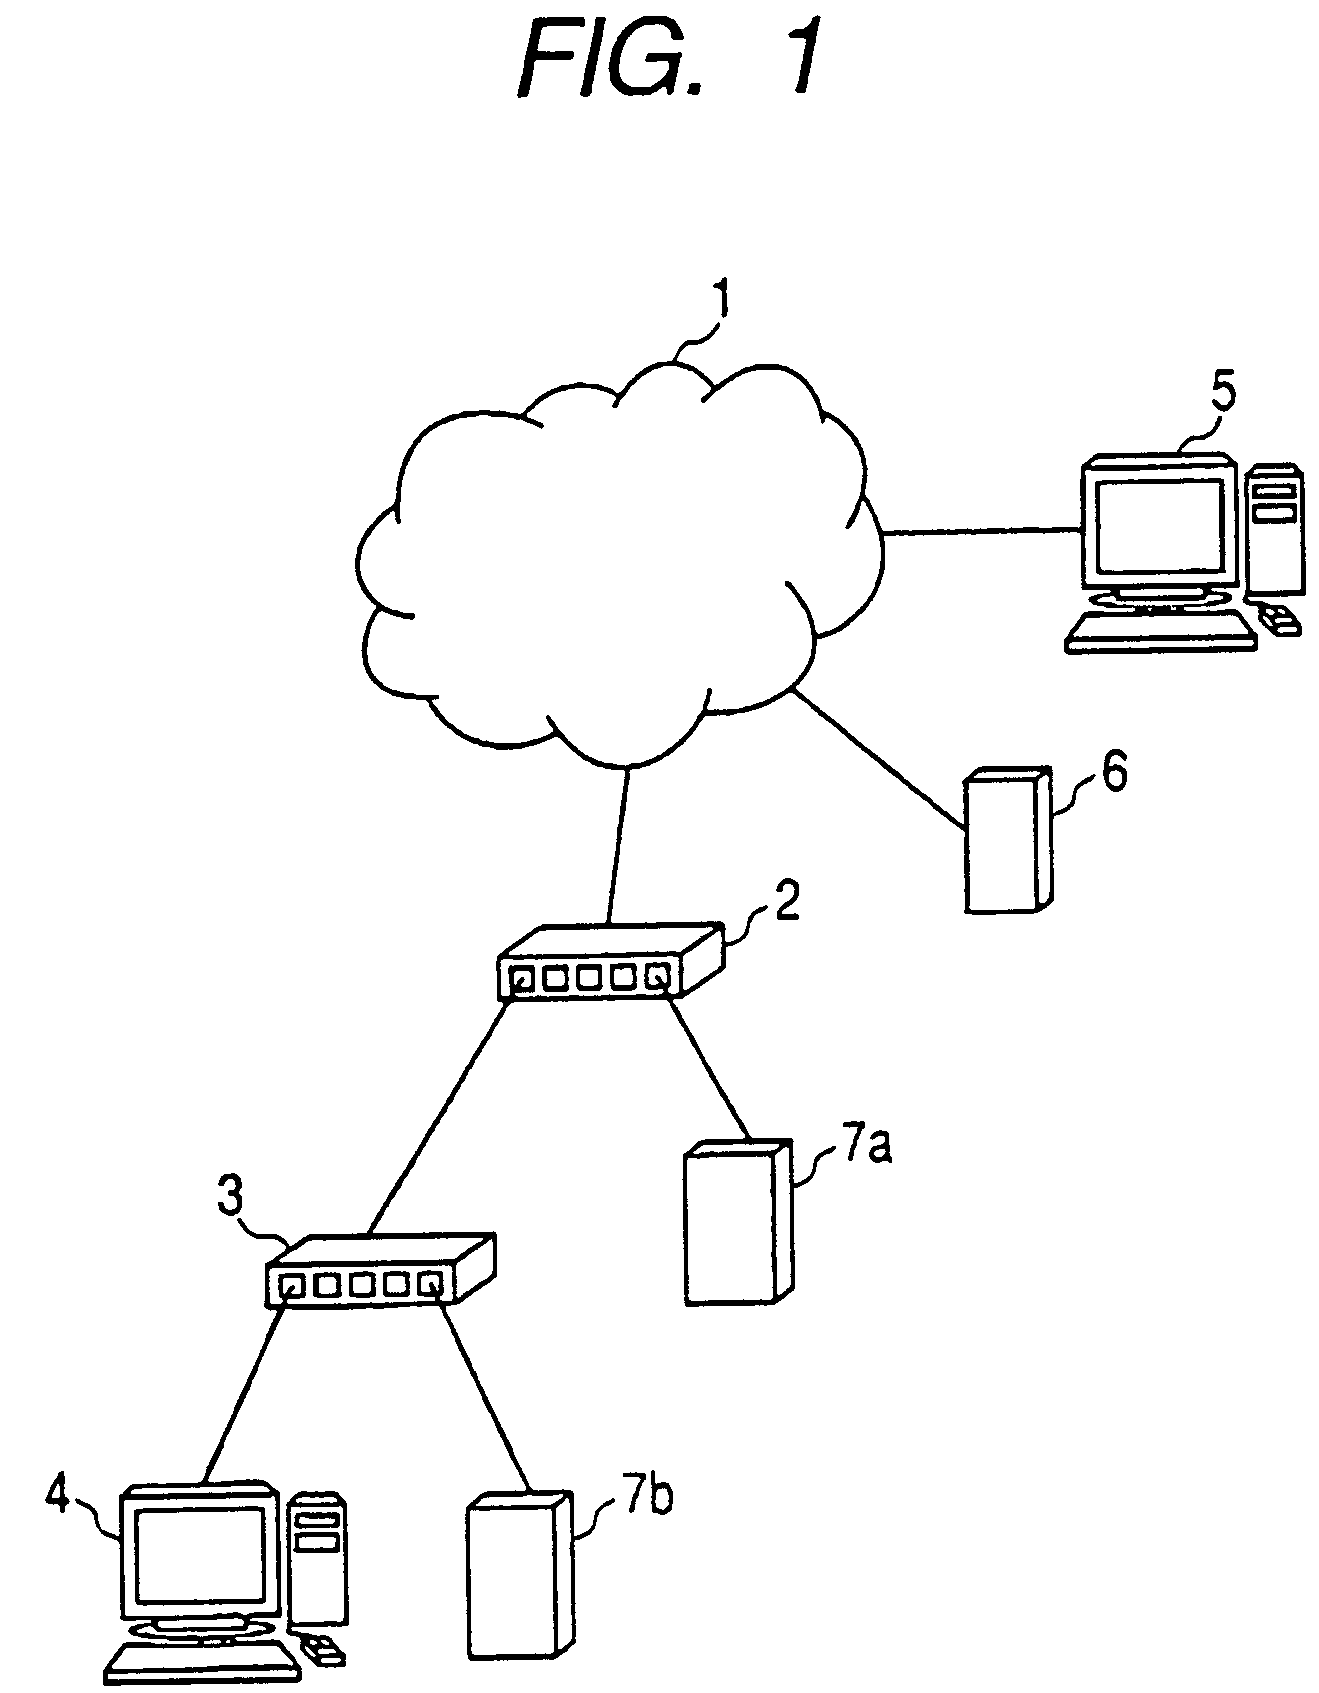 Relay device and server, and port forward setting method